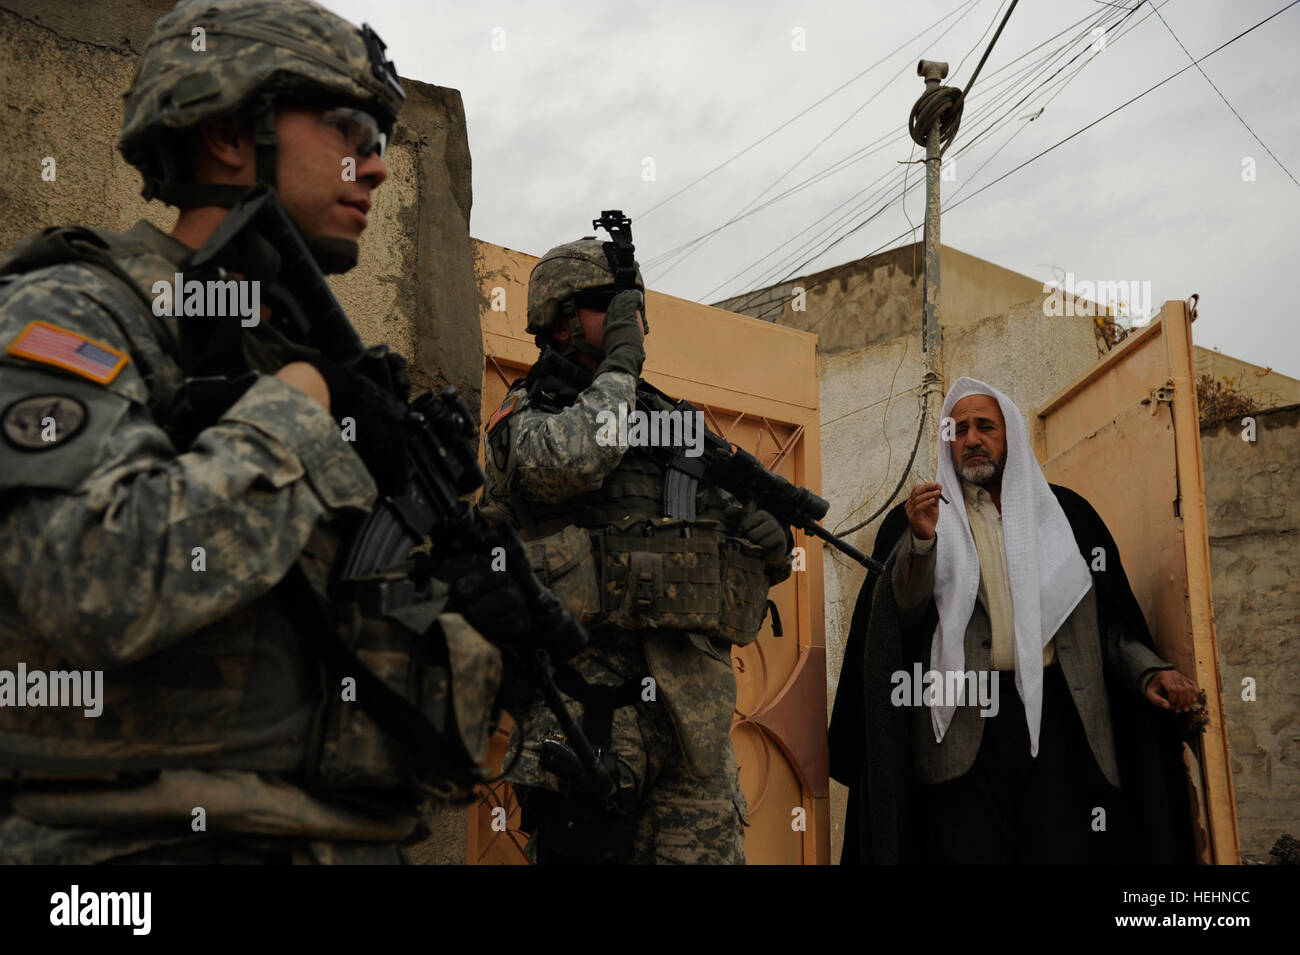 U.S. Army 1st Lt. Jeremy Glossen (left) and Staff Sgt. Gary Pearson (center) of Ironhawk Troop, 3rd Squadron, 3rd Armored Cavalry Regiment from Fort Hood, Texas, stop to visit with a local Iraqi man during a patrol in the Al Qirwan neighborhood of Mosul, Iraq, Dec. 24, 2008.   (U.S. Air Force Photo by Staff Sgt. JoAnn S. Makinano/ Released) Flickr - The U.S. Army - www.Army.mil (75) Stock Photo